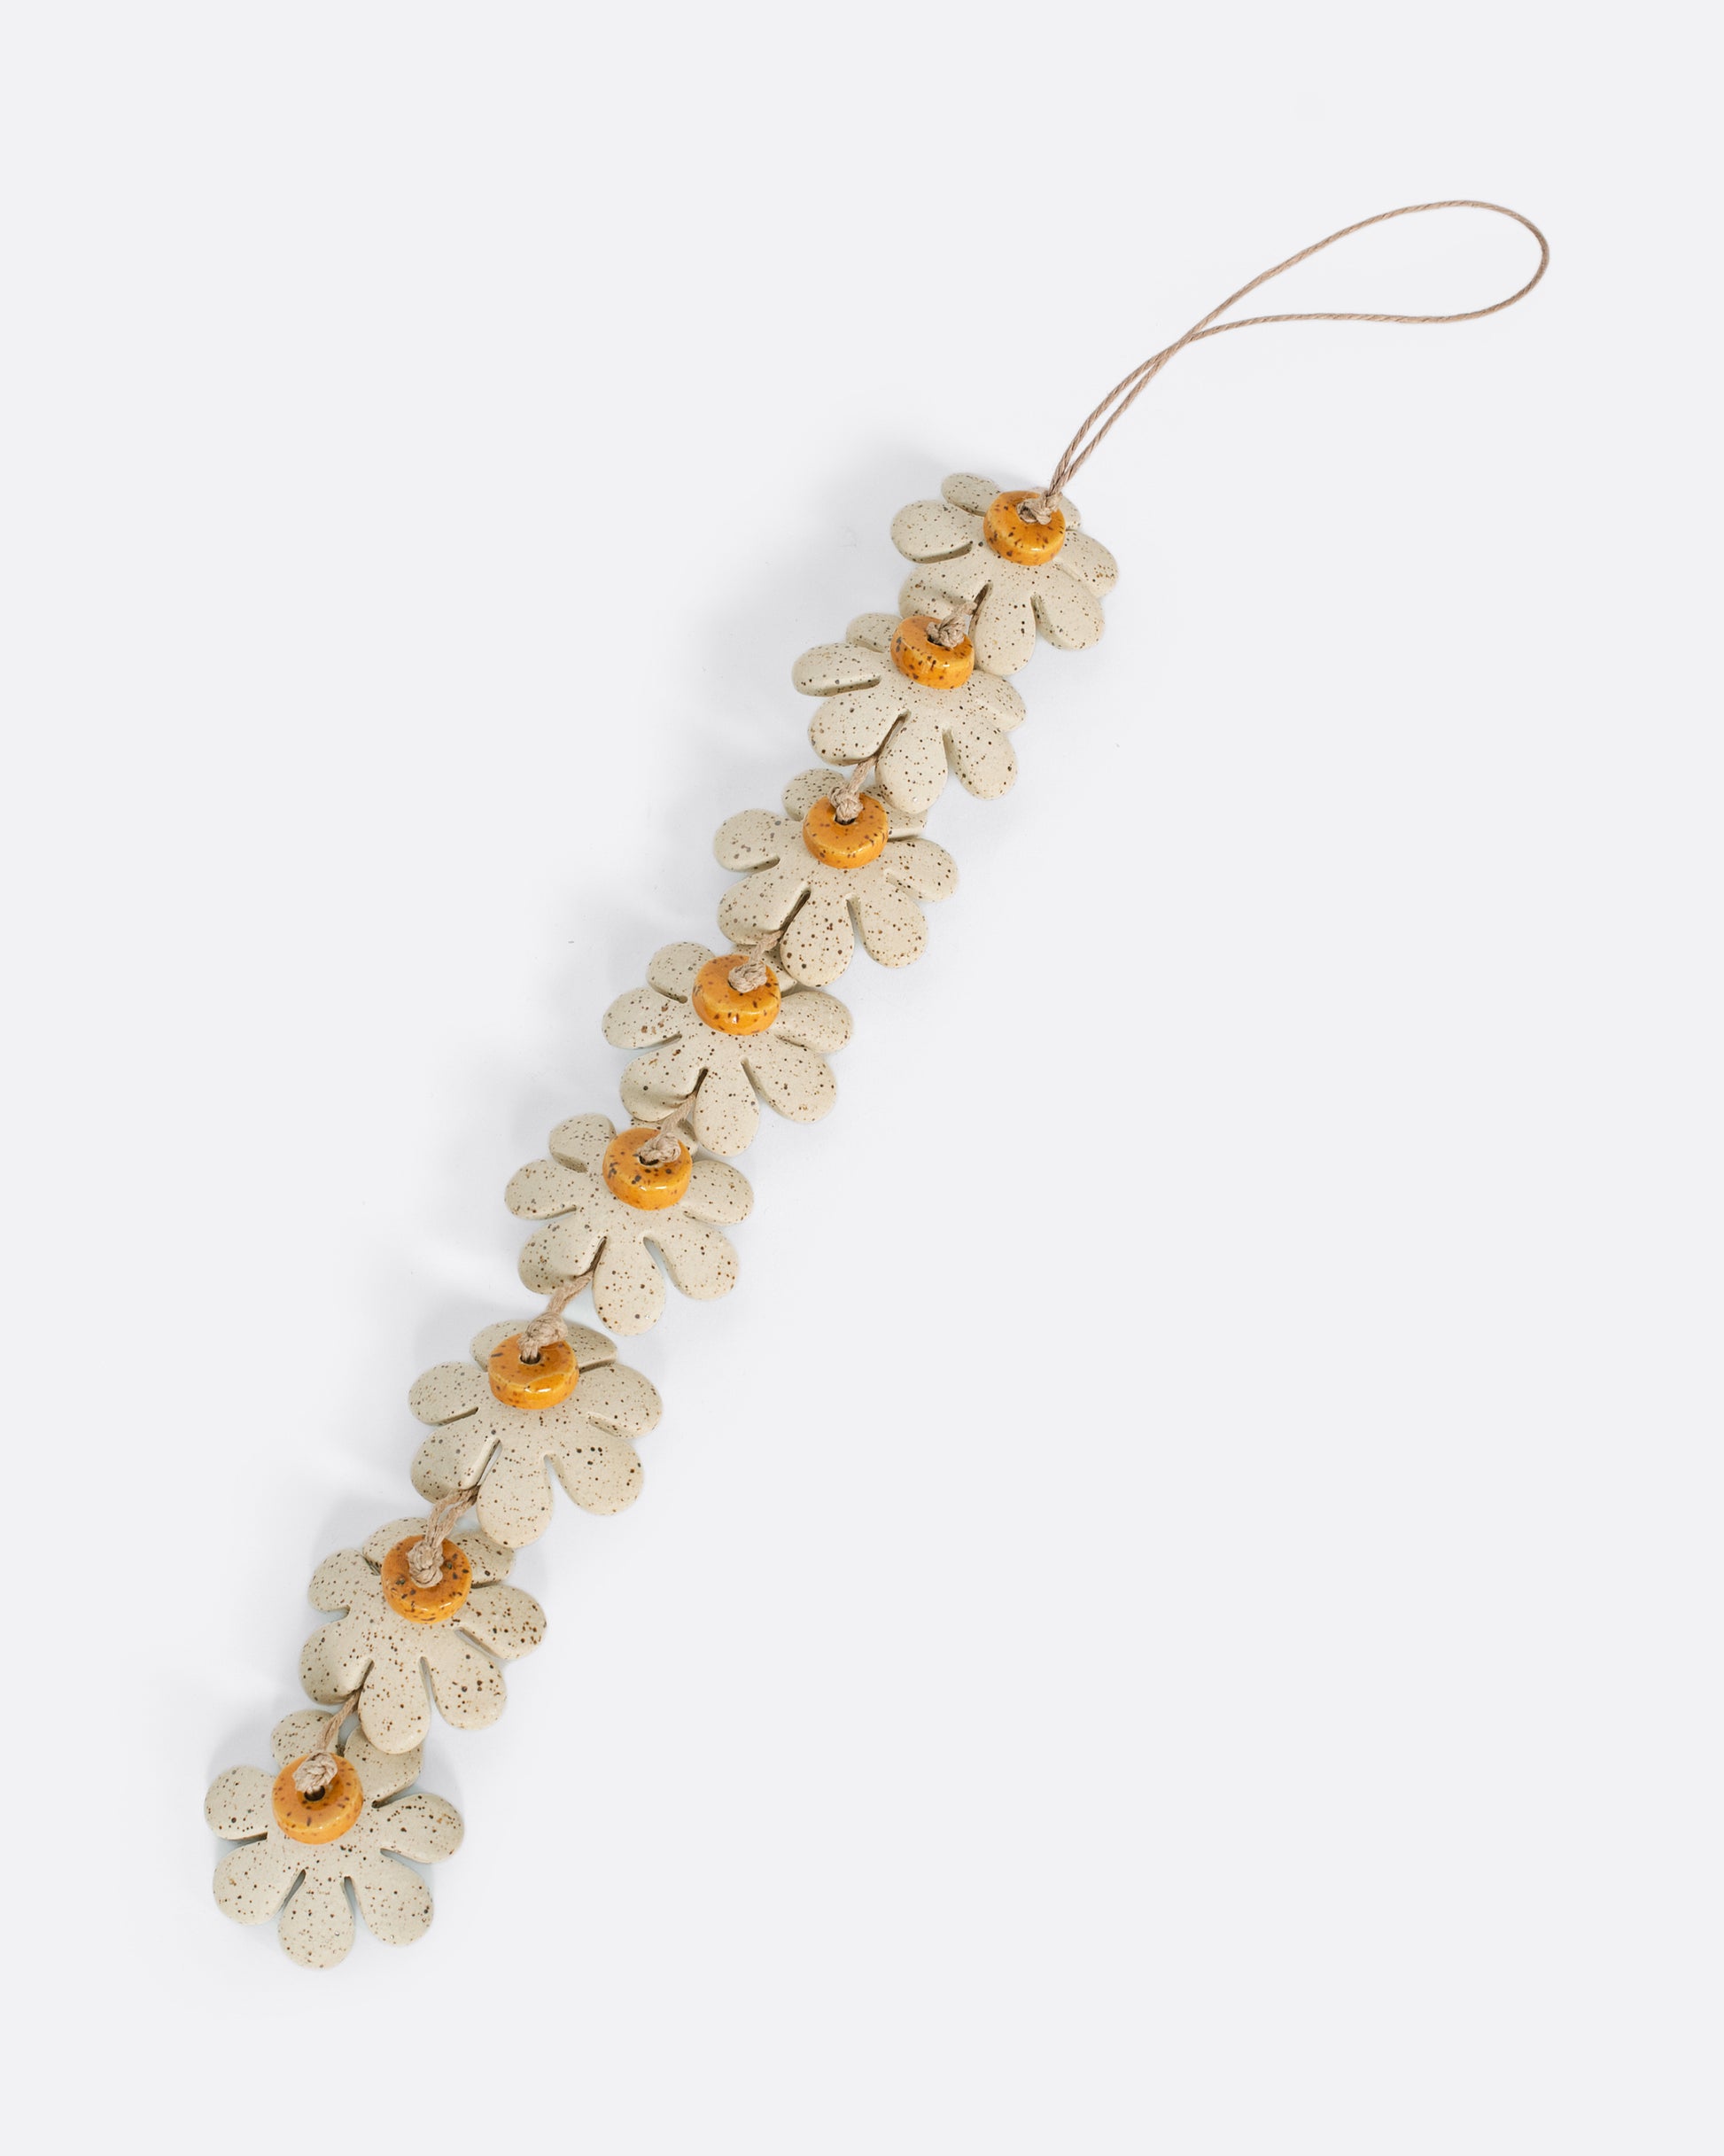 This daisy chain ceramic garland adds a burst of sunshine to any corner, window, or kids room. They look especially sweet hanging in a cluster like a mobile over a crib.